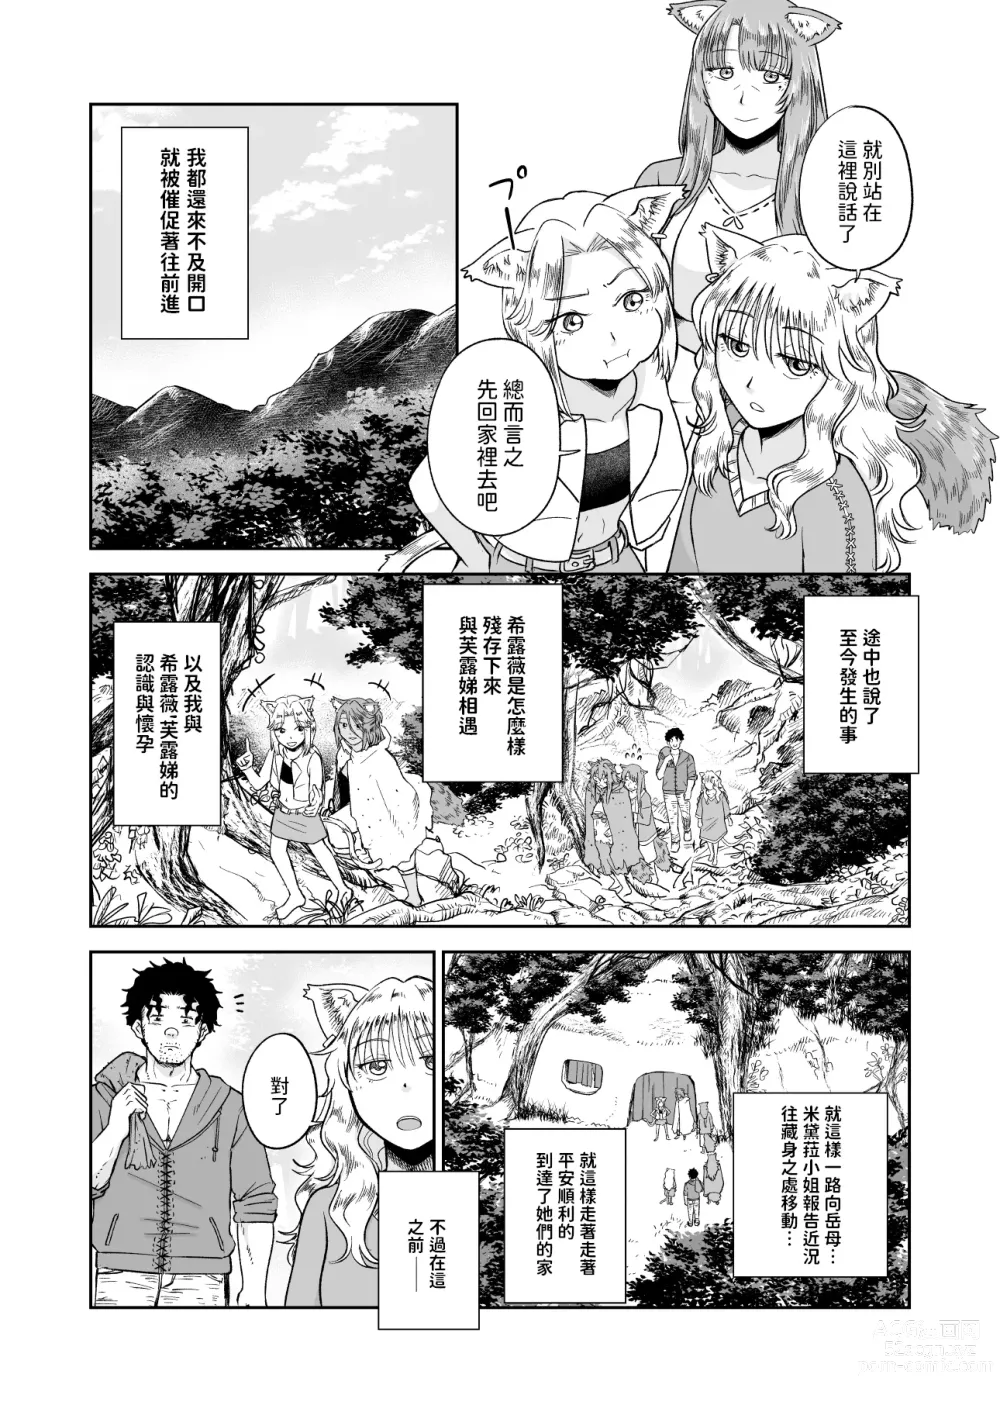 Page 7 of doujinshi ケモ耳娘とゼロから性活 3  中文翻譯